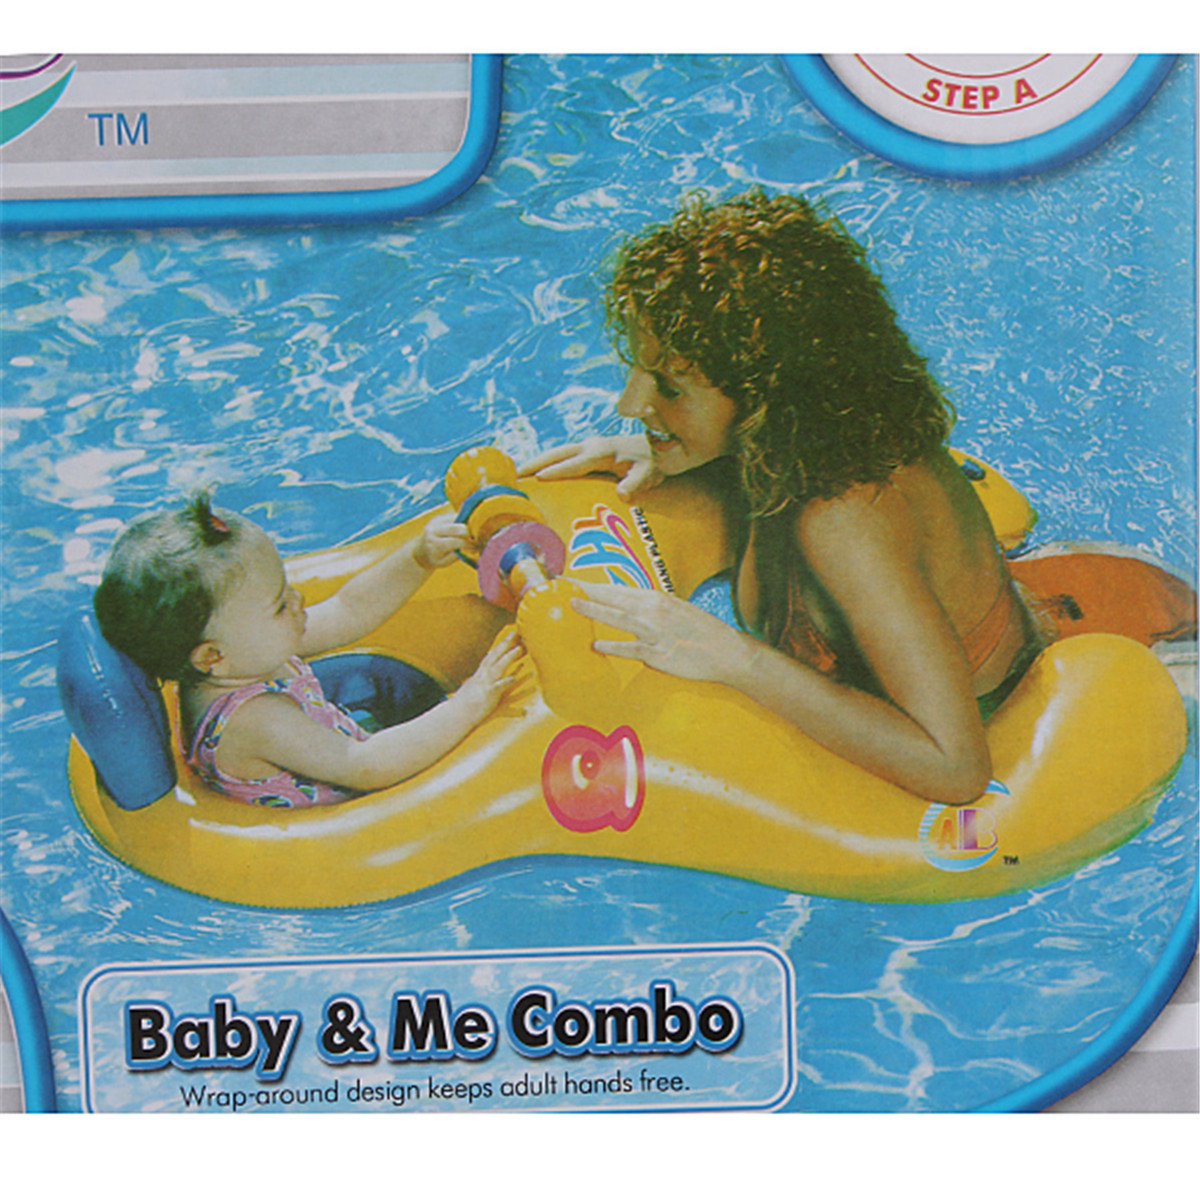 ABC-Safe-Inflatable-Mother-And-Baby-Swim-Float-Boat-Raft-Kids-Chair-Seat-Boat-Play-Pool-Bath-Swimmin-48774-9